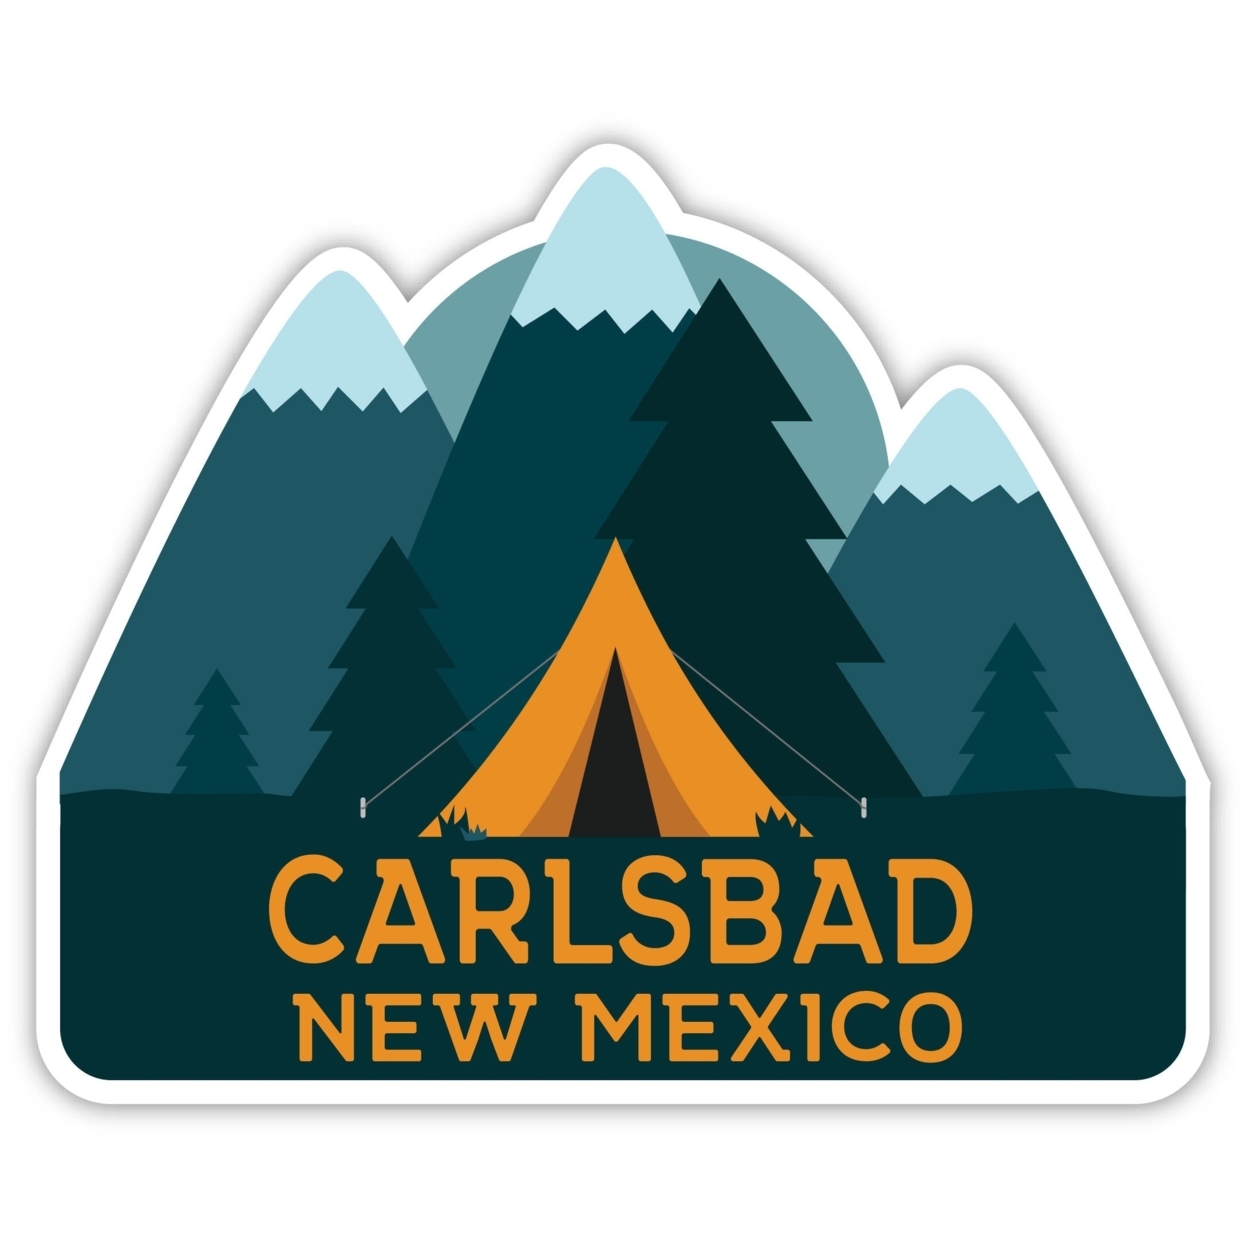 Carlsbad New Mexico Souvenir Decorative Stickers (Choose Theme And Size) - 4-Pack, 4-Inch, Tent